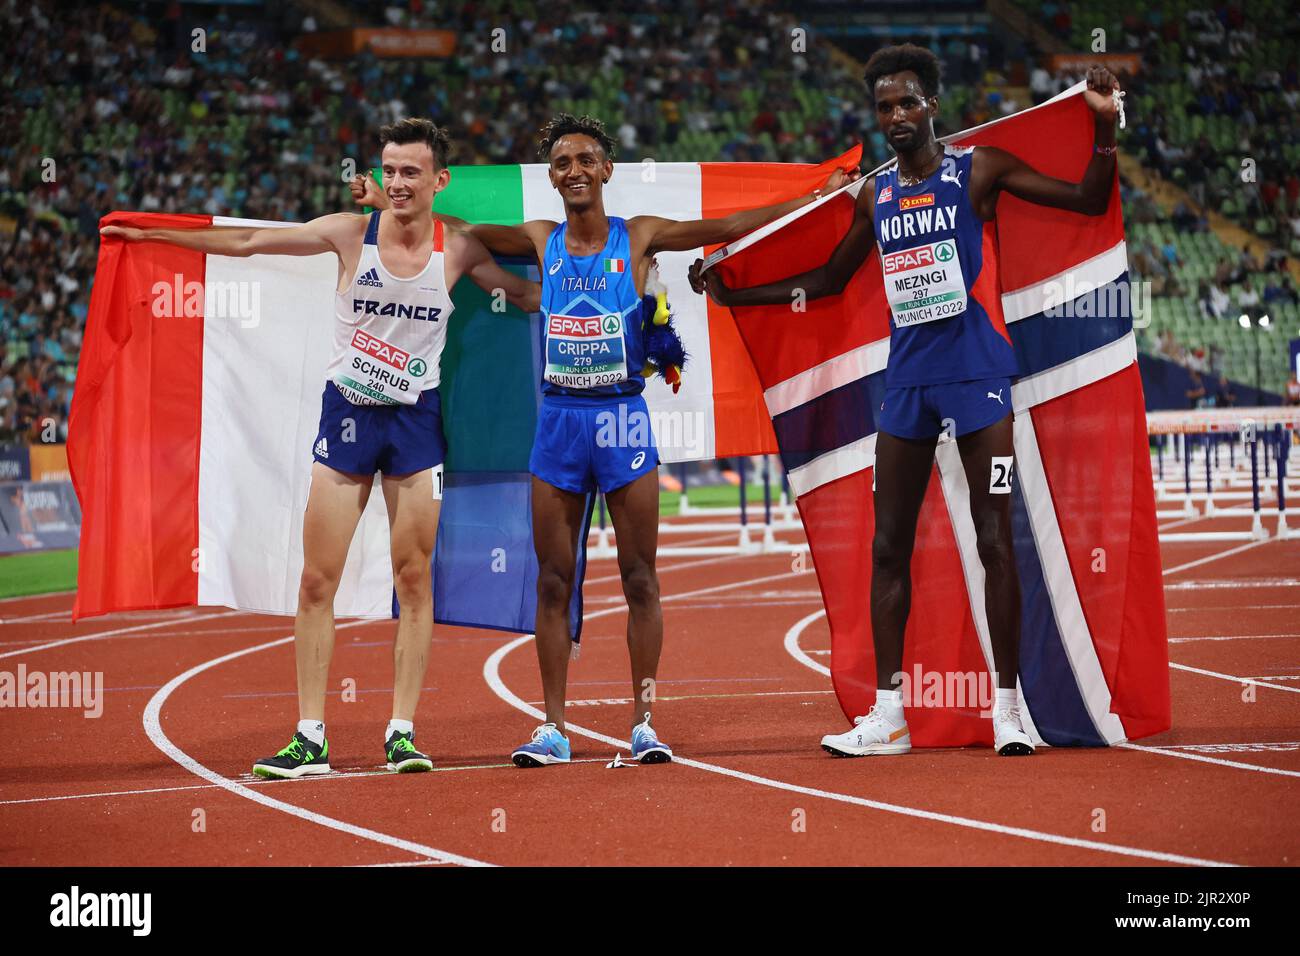 2022 European Championships - Athletics - Olympiastadion, Munich, Germany - August 21, 2022 Italy's Yemaneberhan Crippa celebrates after winning gold in the men's 10,000m final alongside silver medallist Norway's Zerei Kbrom Mezngi and bronze medallist France's Yann Schrub REUTERS/Wolfgang Rattay Stock Photo